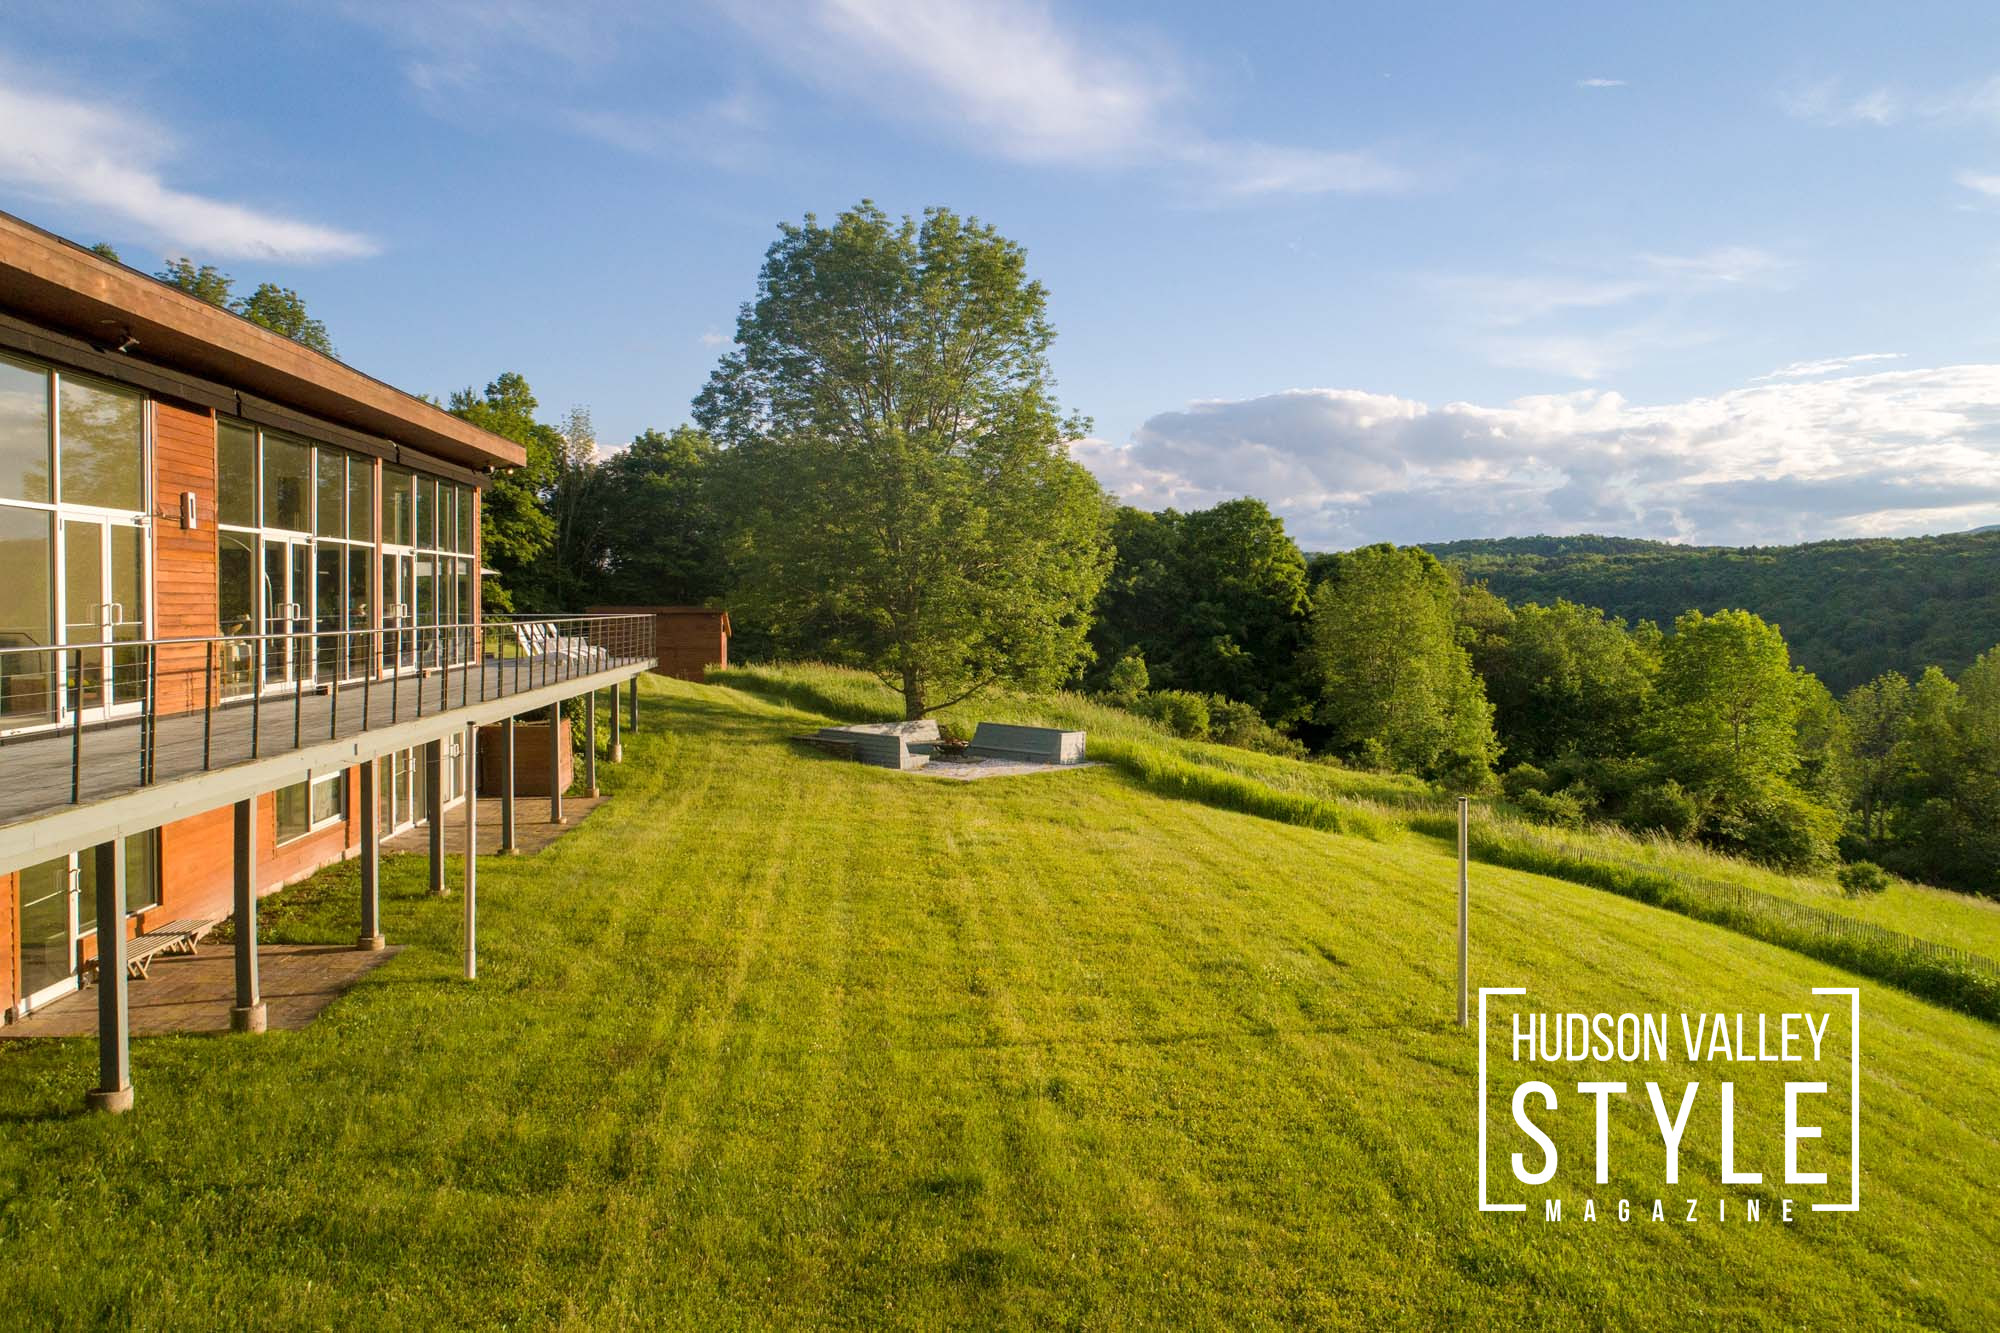 Catskills Cachet: A Weekend at The Roxbury Haus in Catskills – Photo Tour – Photography by Maxwell Alexander for Alluvion Media – Presented by Alluvion Vacations